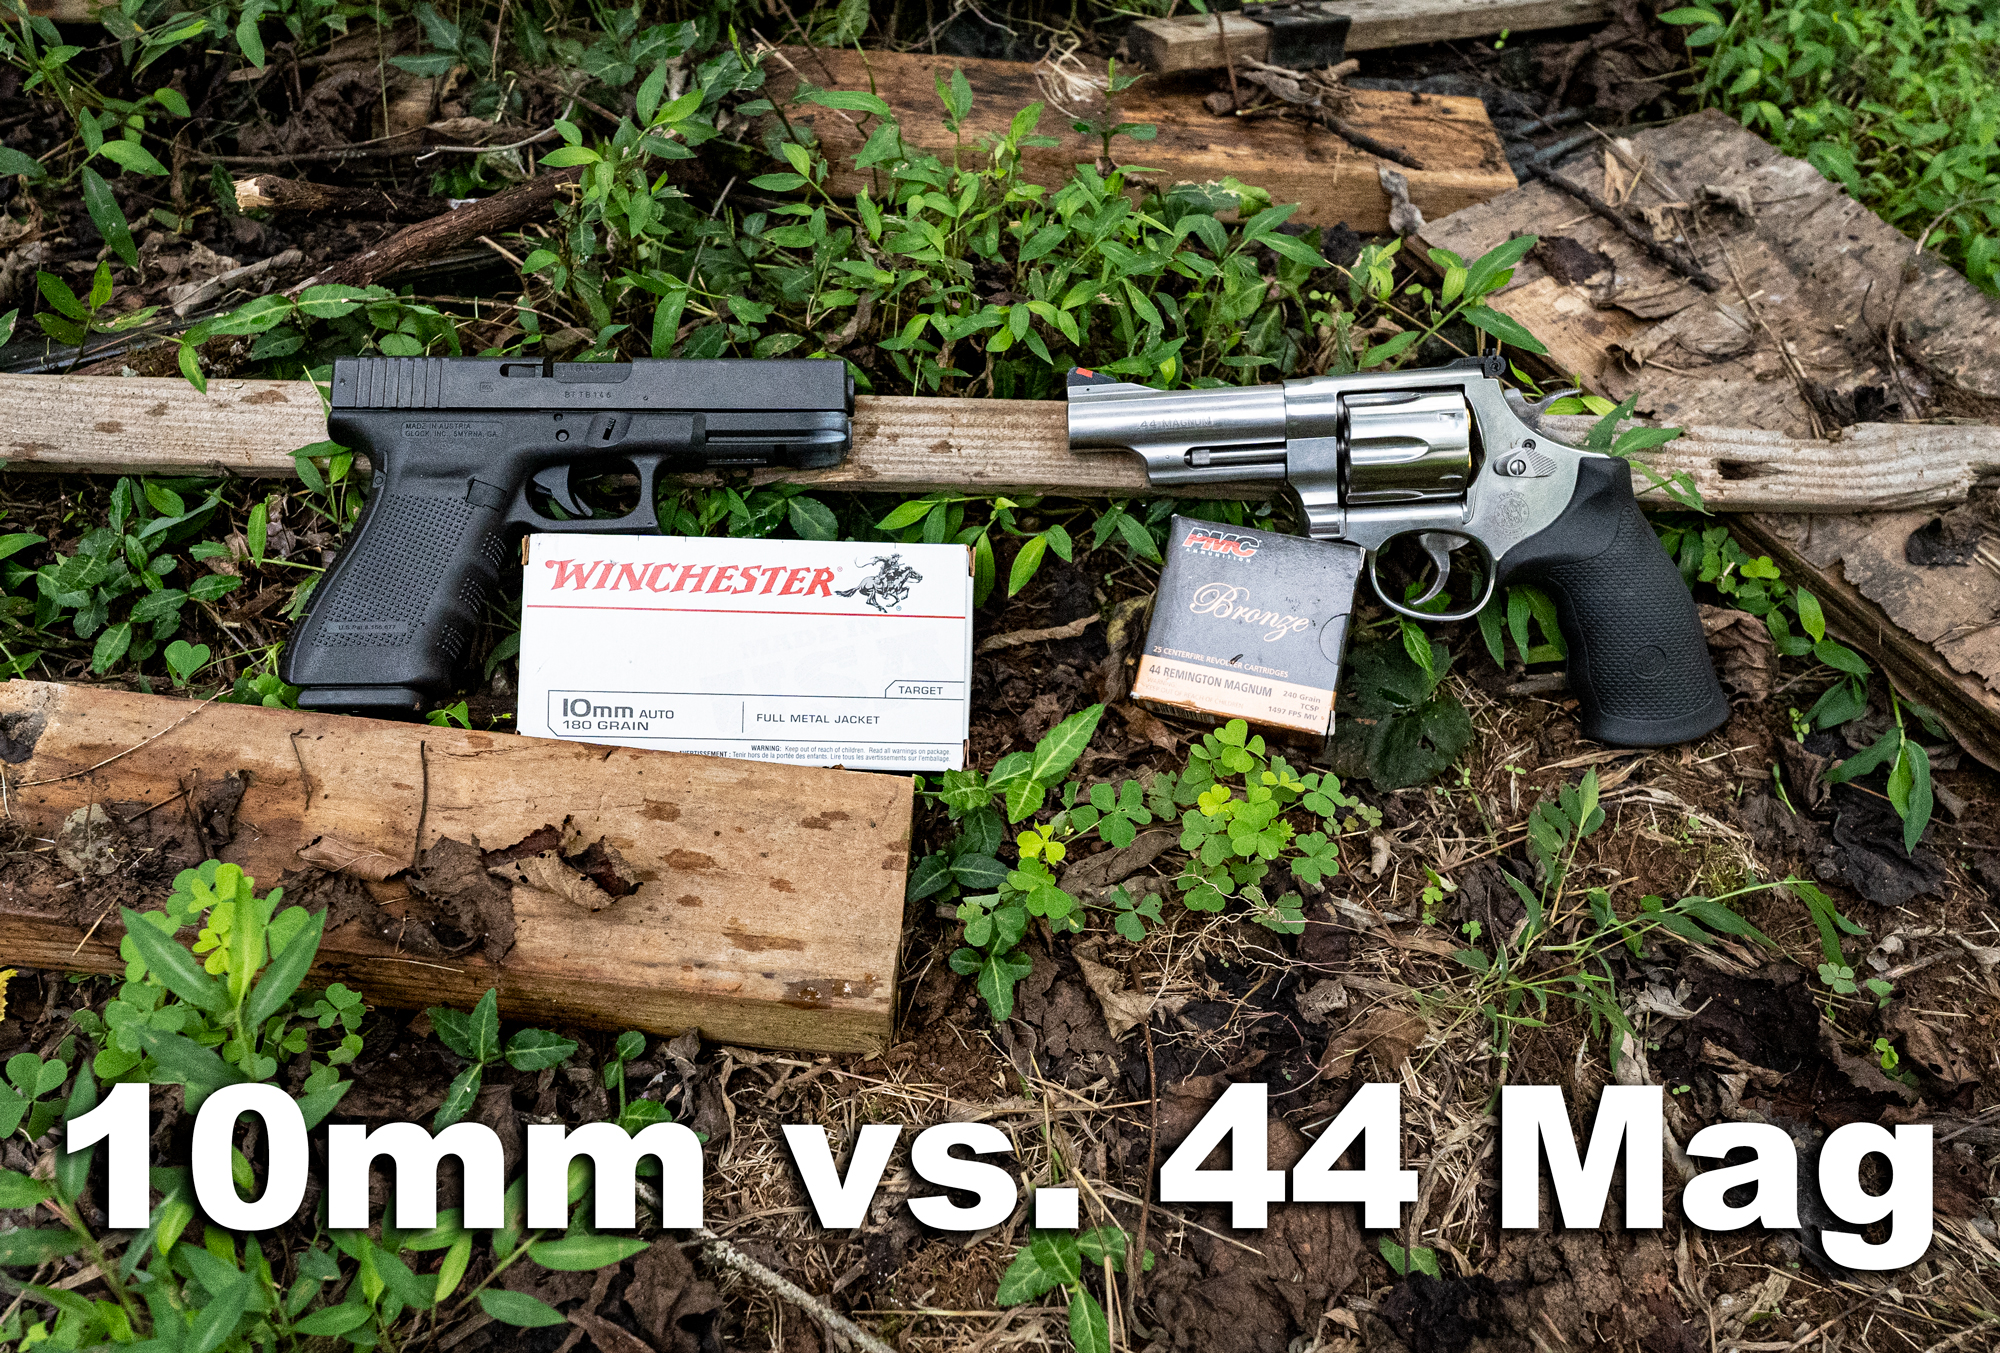 10mm vs 44 magnum pistols with ammo side by side